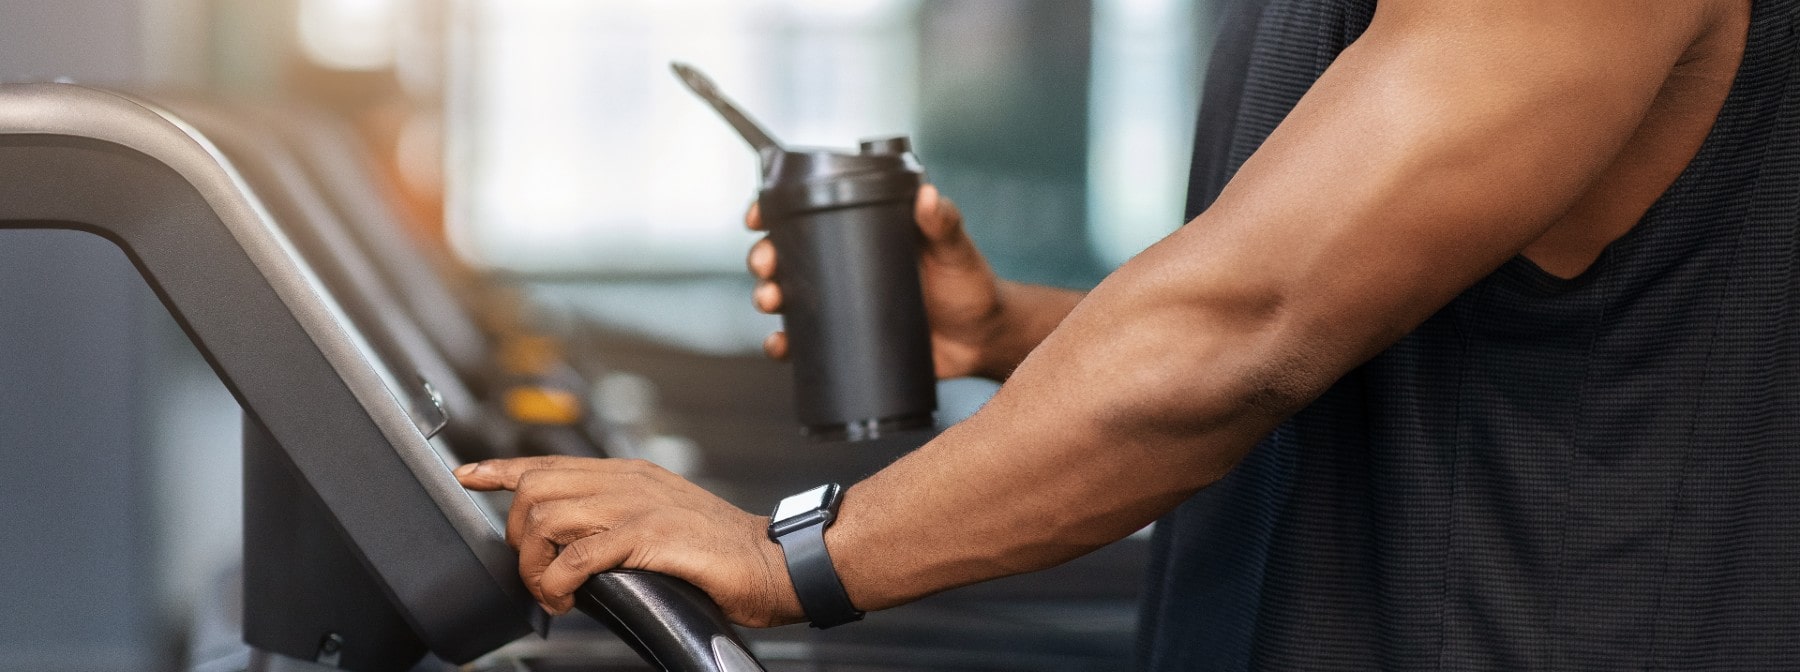 How Much Protein To Build Muscle? - MYPROTEIN™